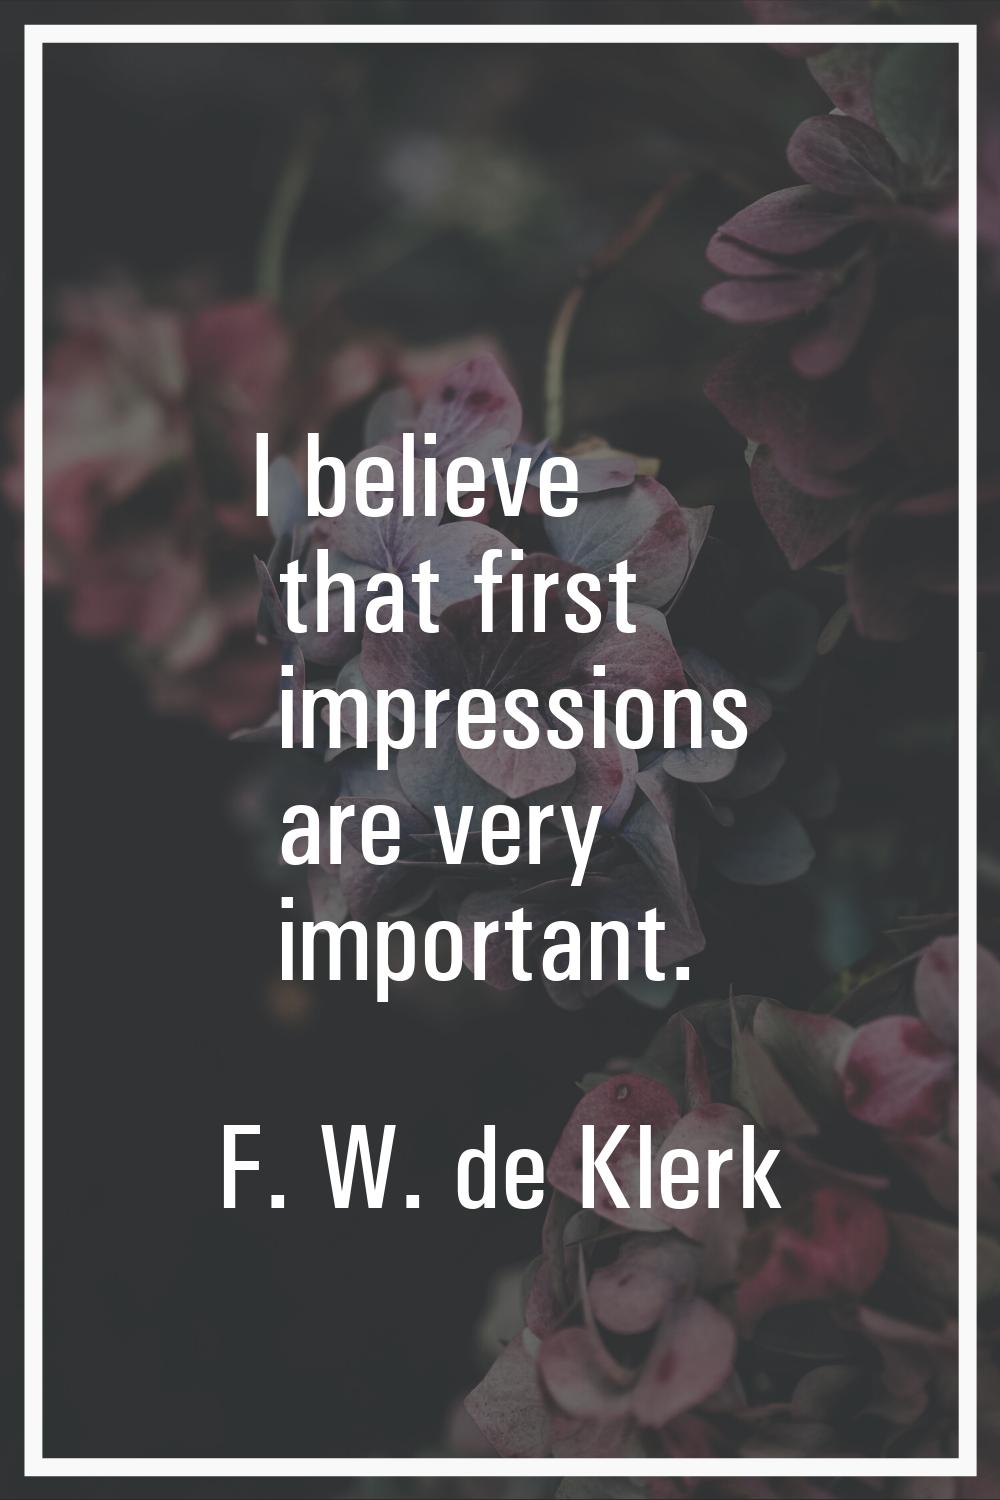 I believe that first impressions are very important.